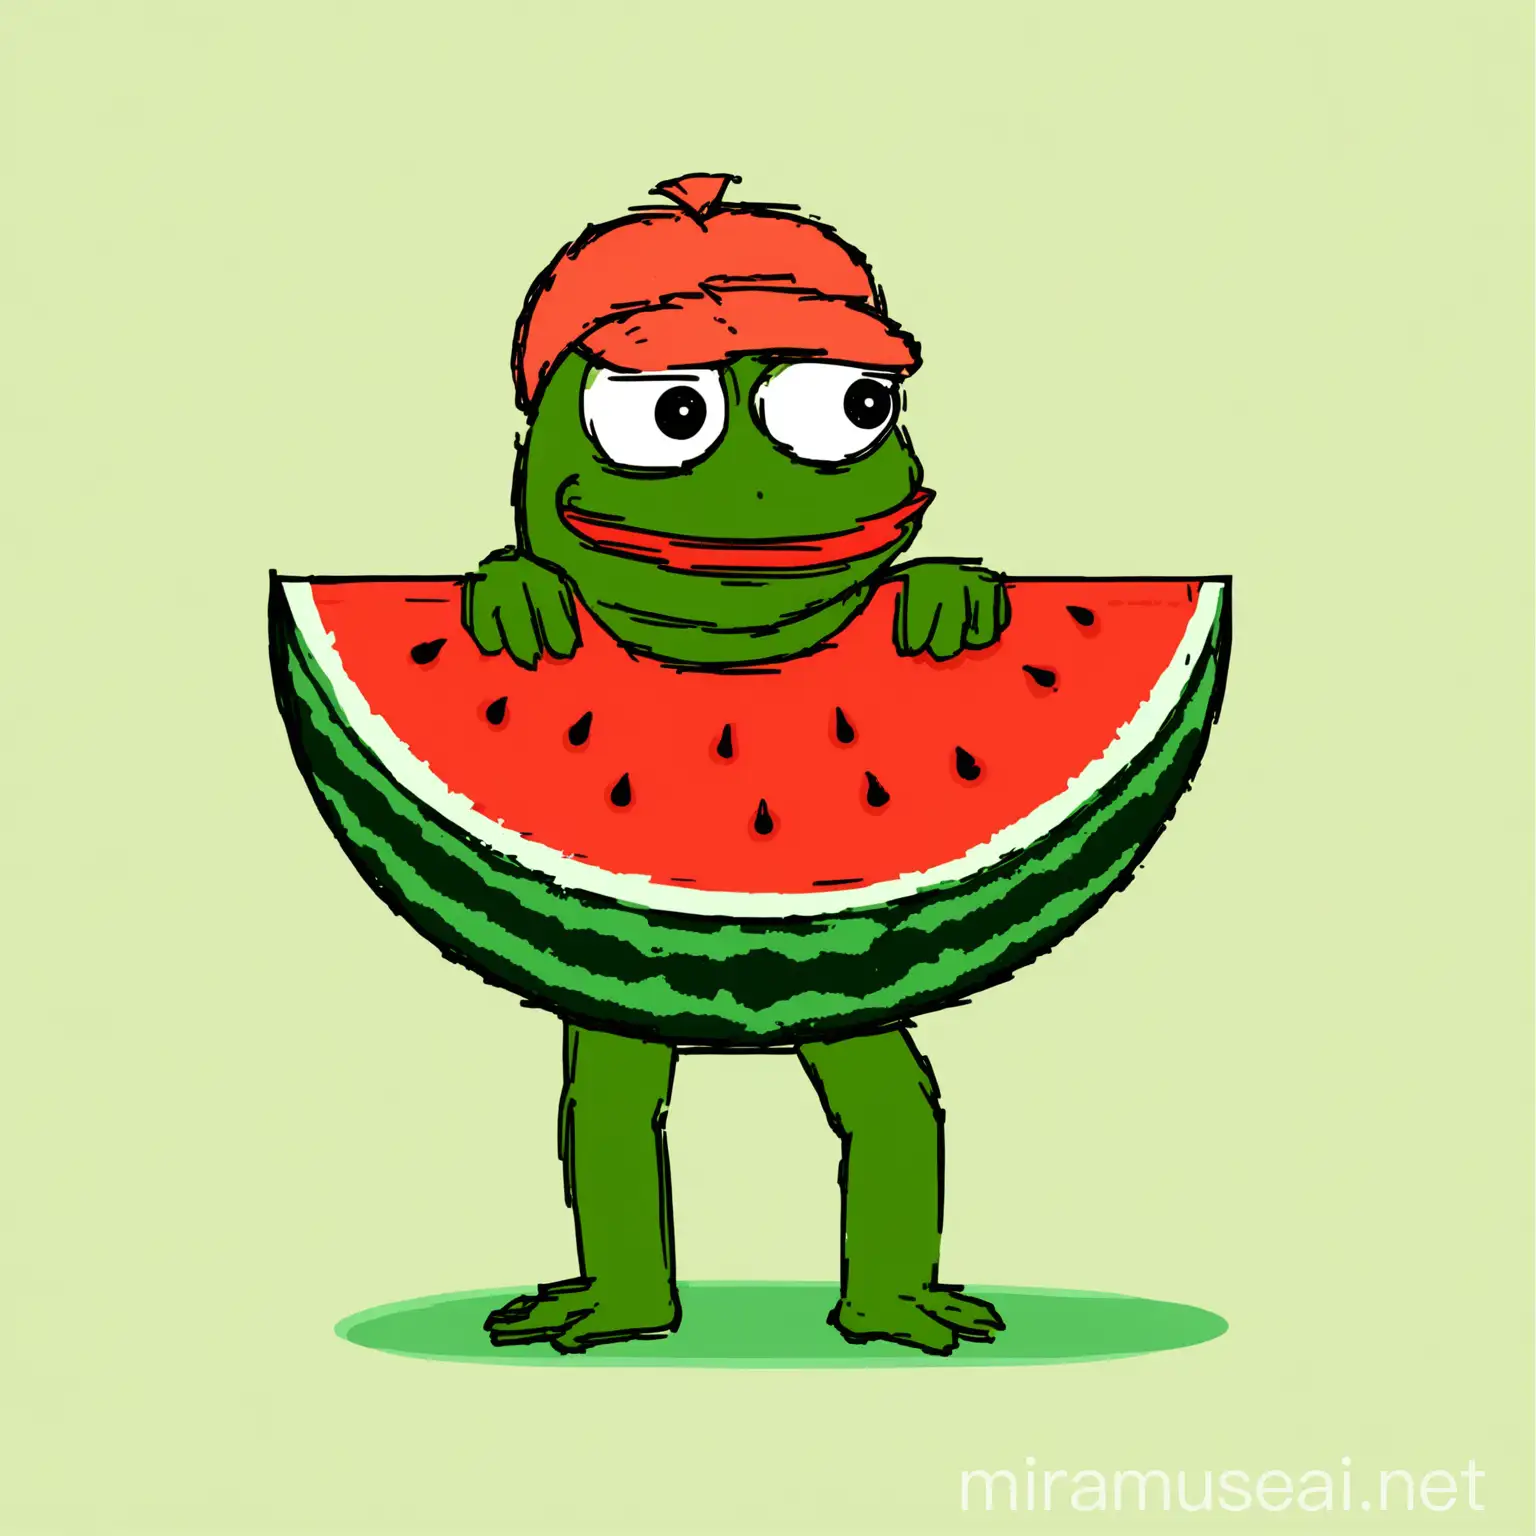 Pepe the Frog with Watermelon in 2D Flat Art Style